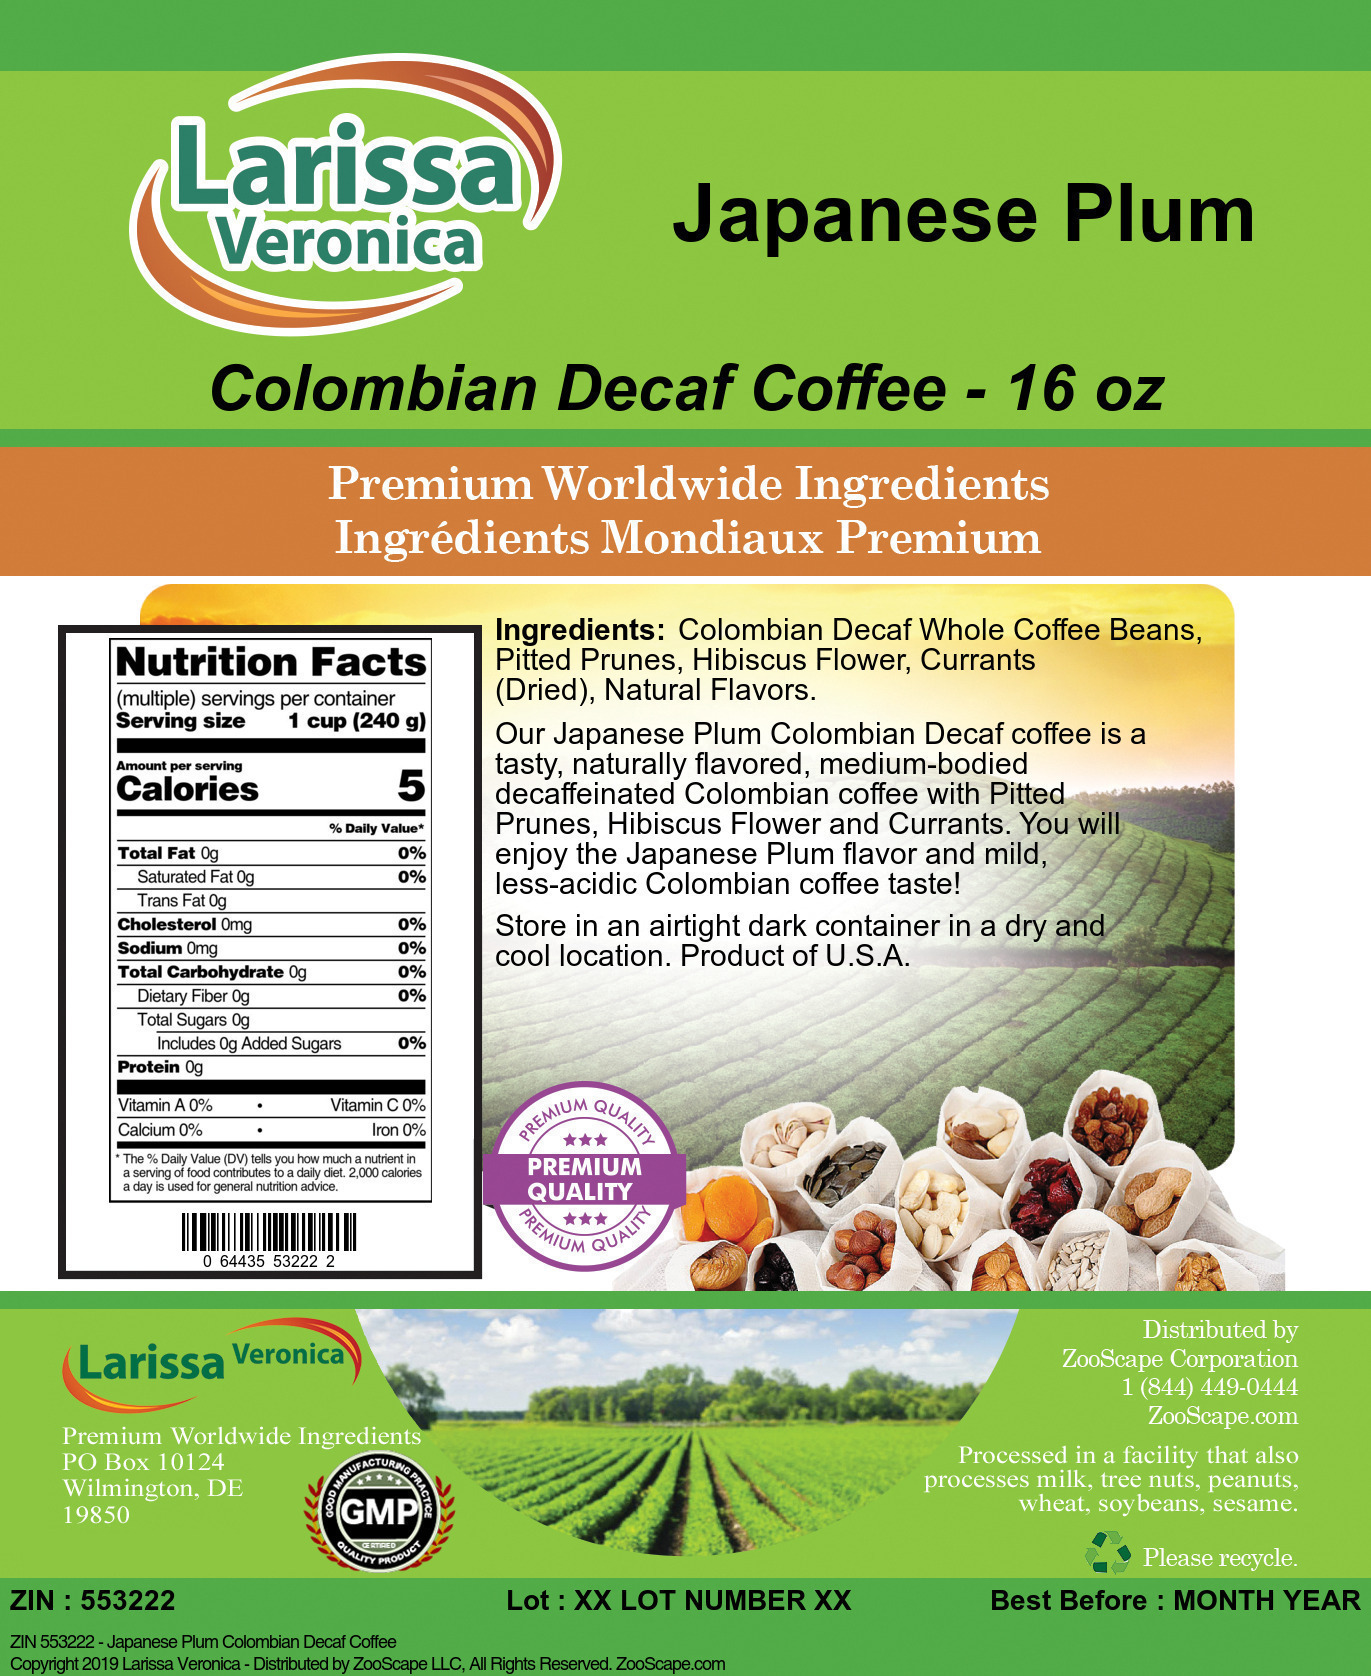 Japanese Plum Colombian Decaf Coffee - Label